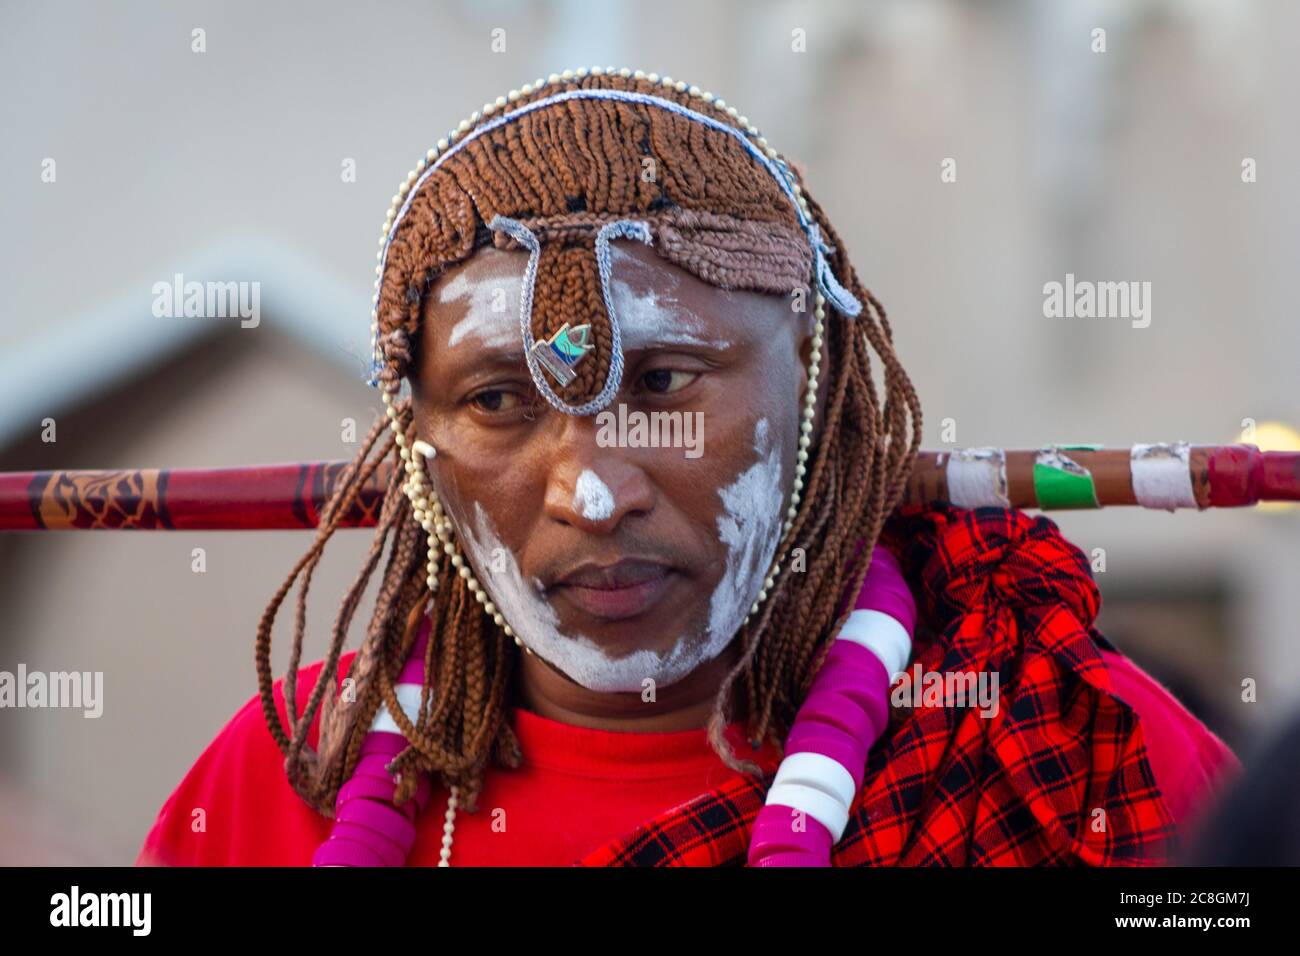 Portrait of African man wearing Traditional tribe costume with blurred background shot taken during African festival in Katara cultural village Doha Stock Photo